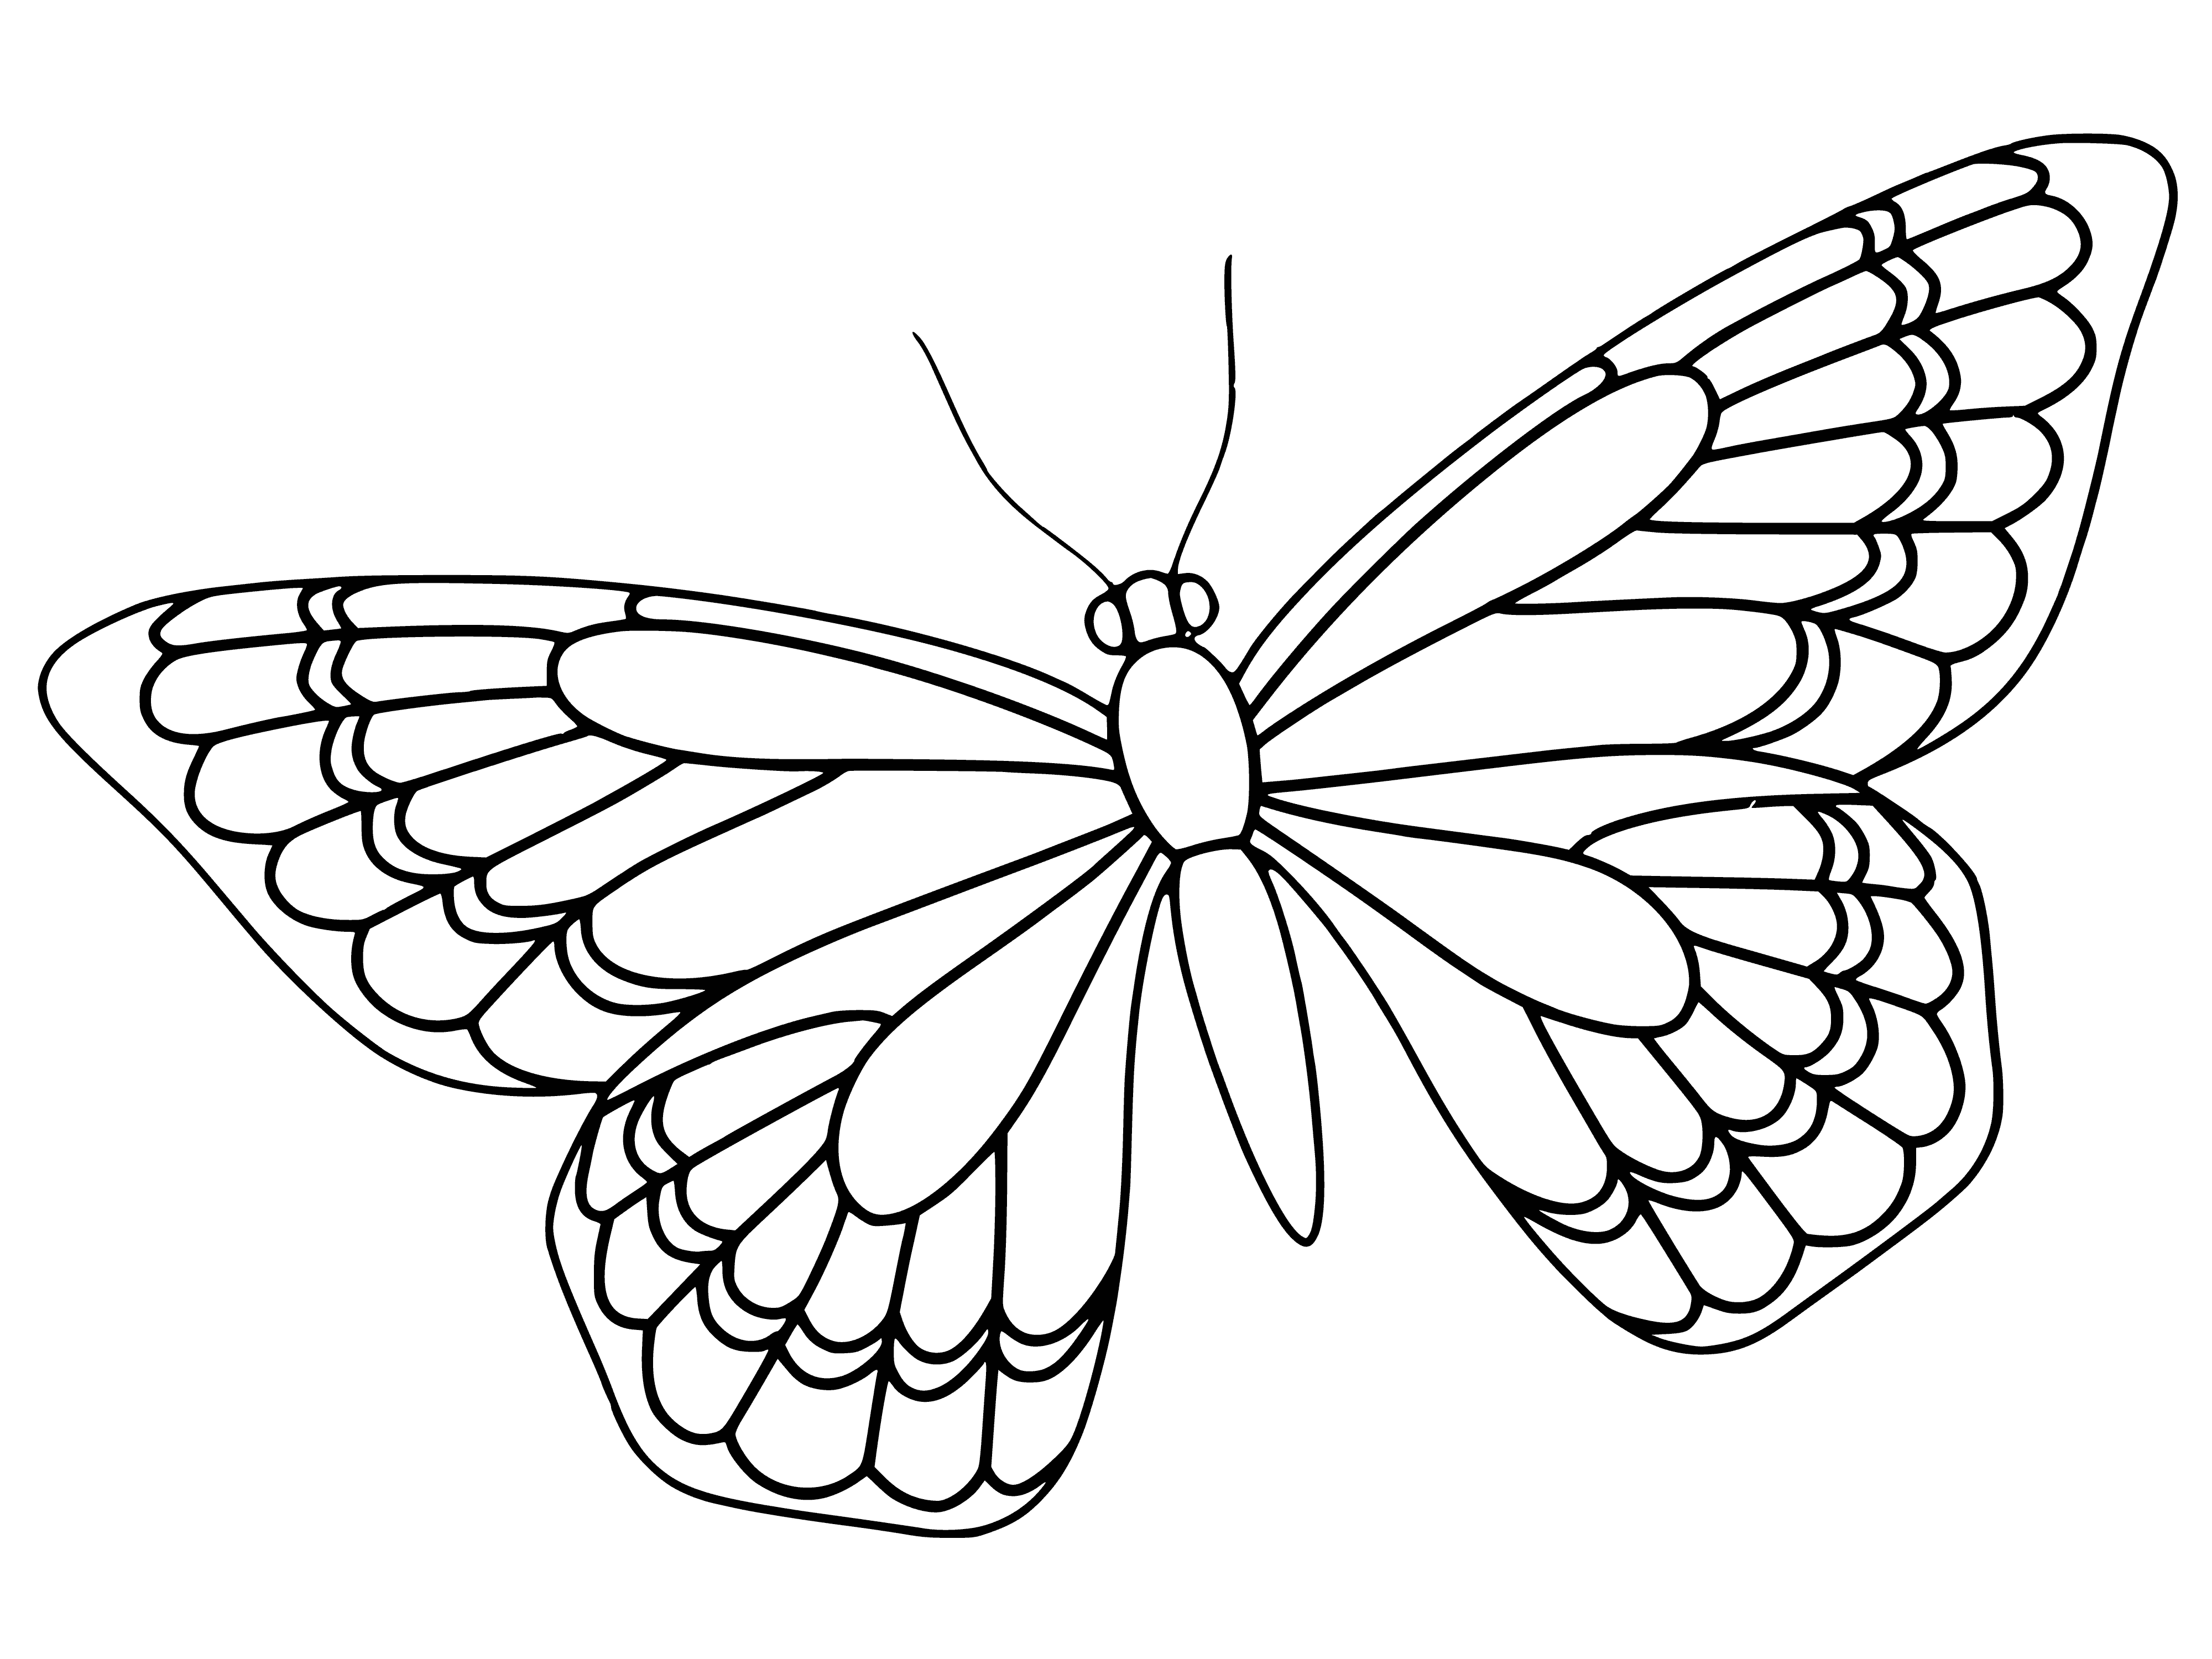 coloring page: Two butterflies, orange & yellow, fly with open wings against green background.